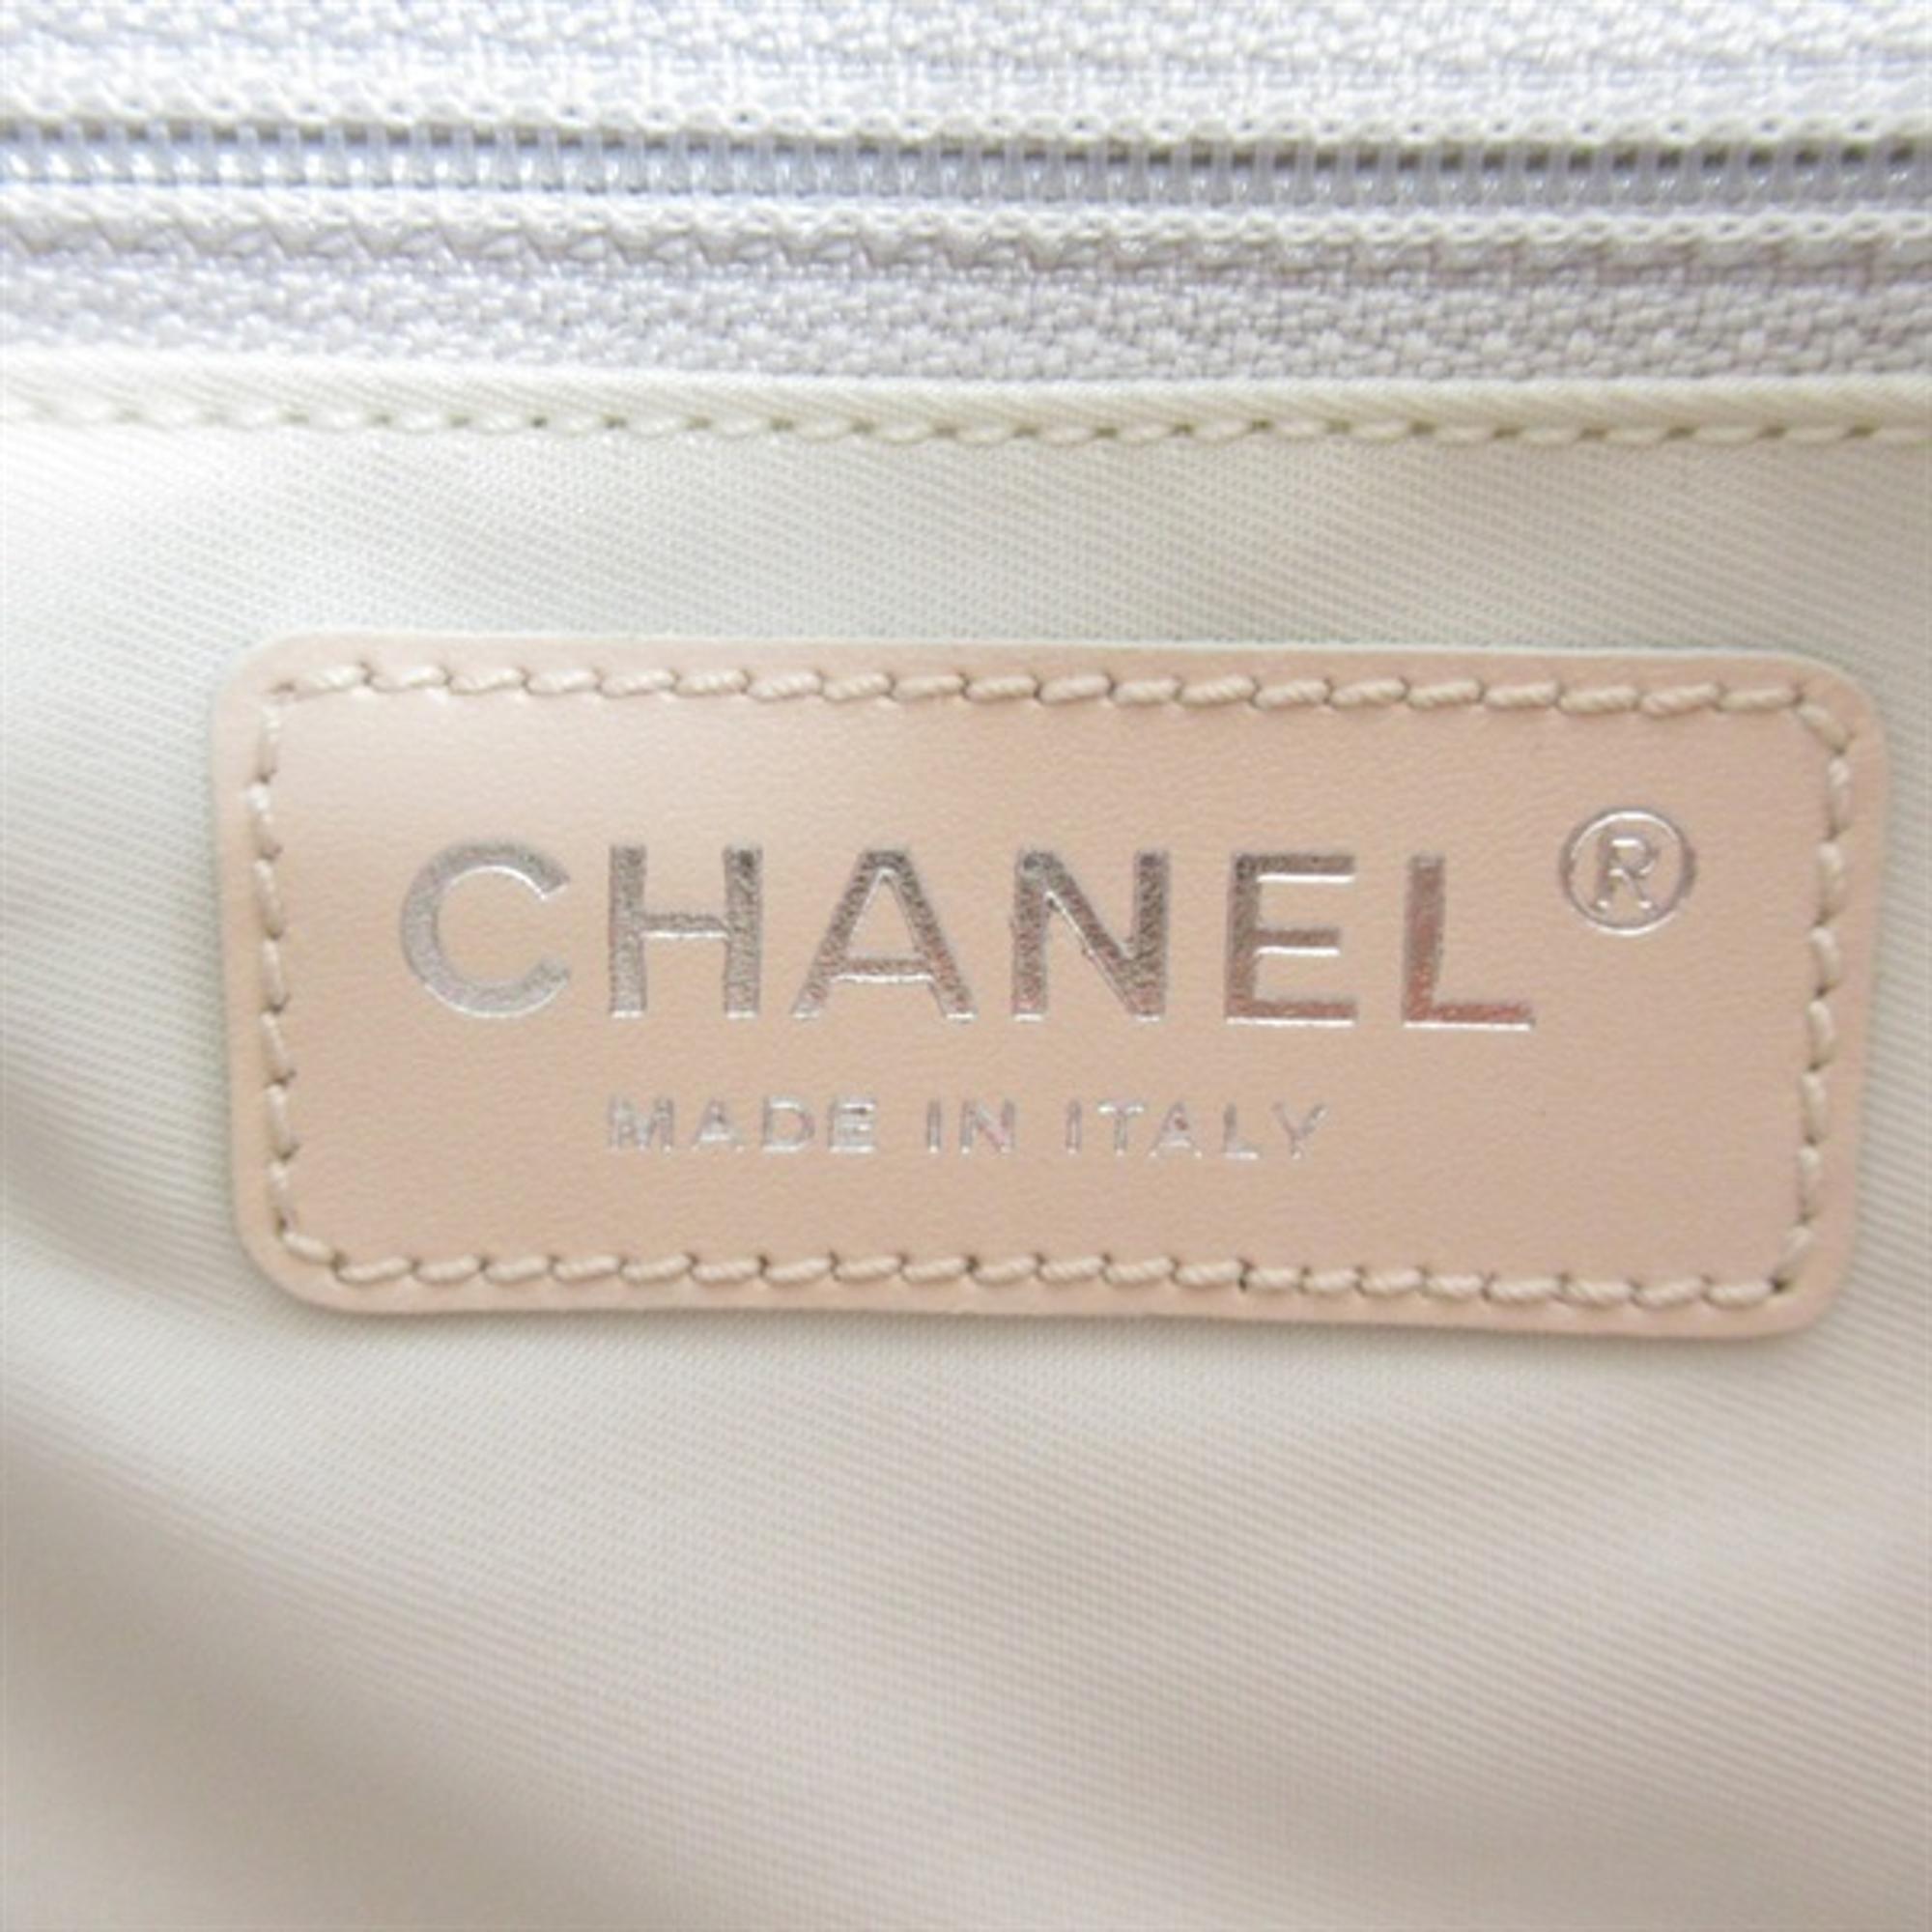 Chanel Brown Canvas New Travel Line Tote Bag